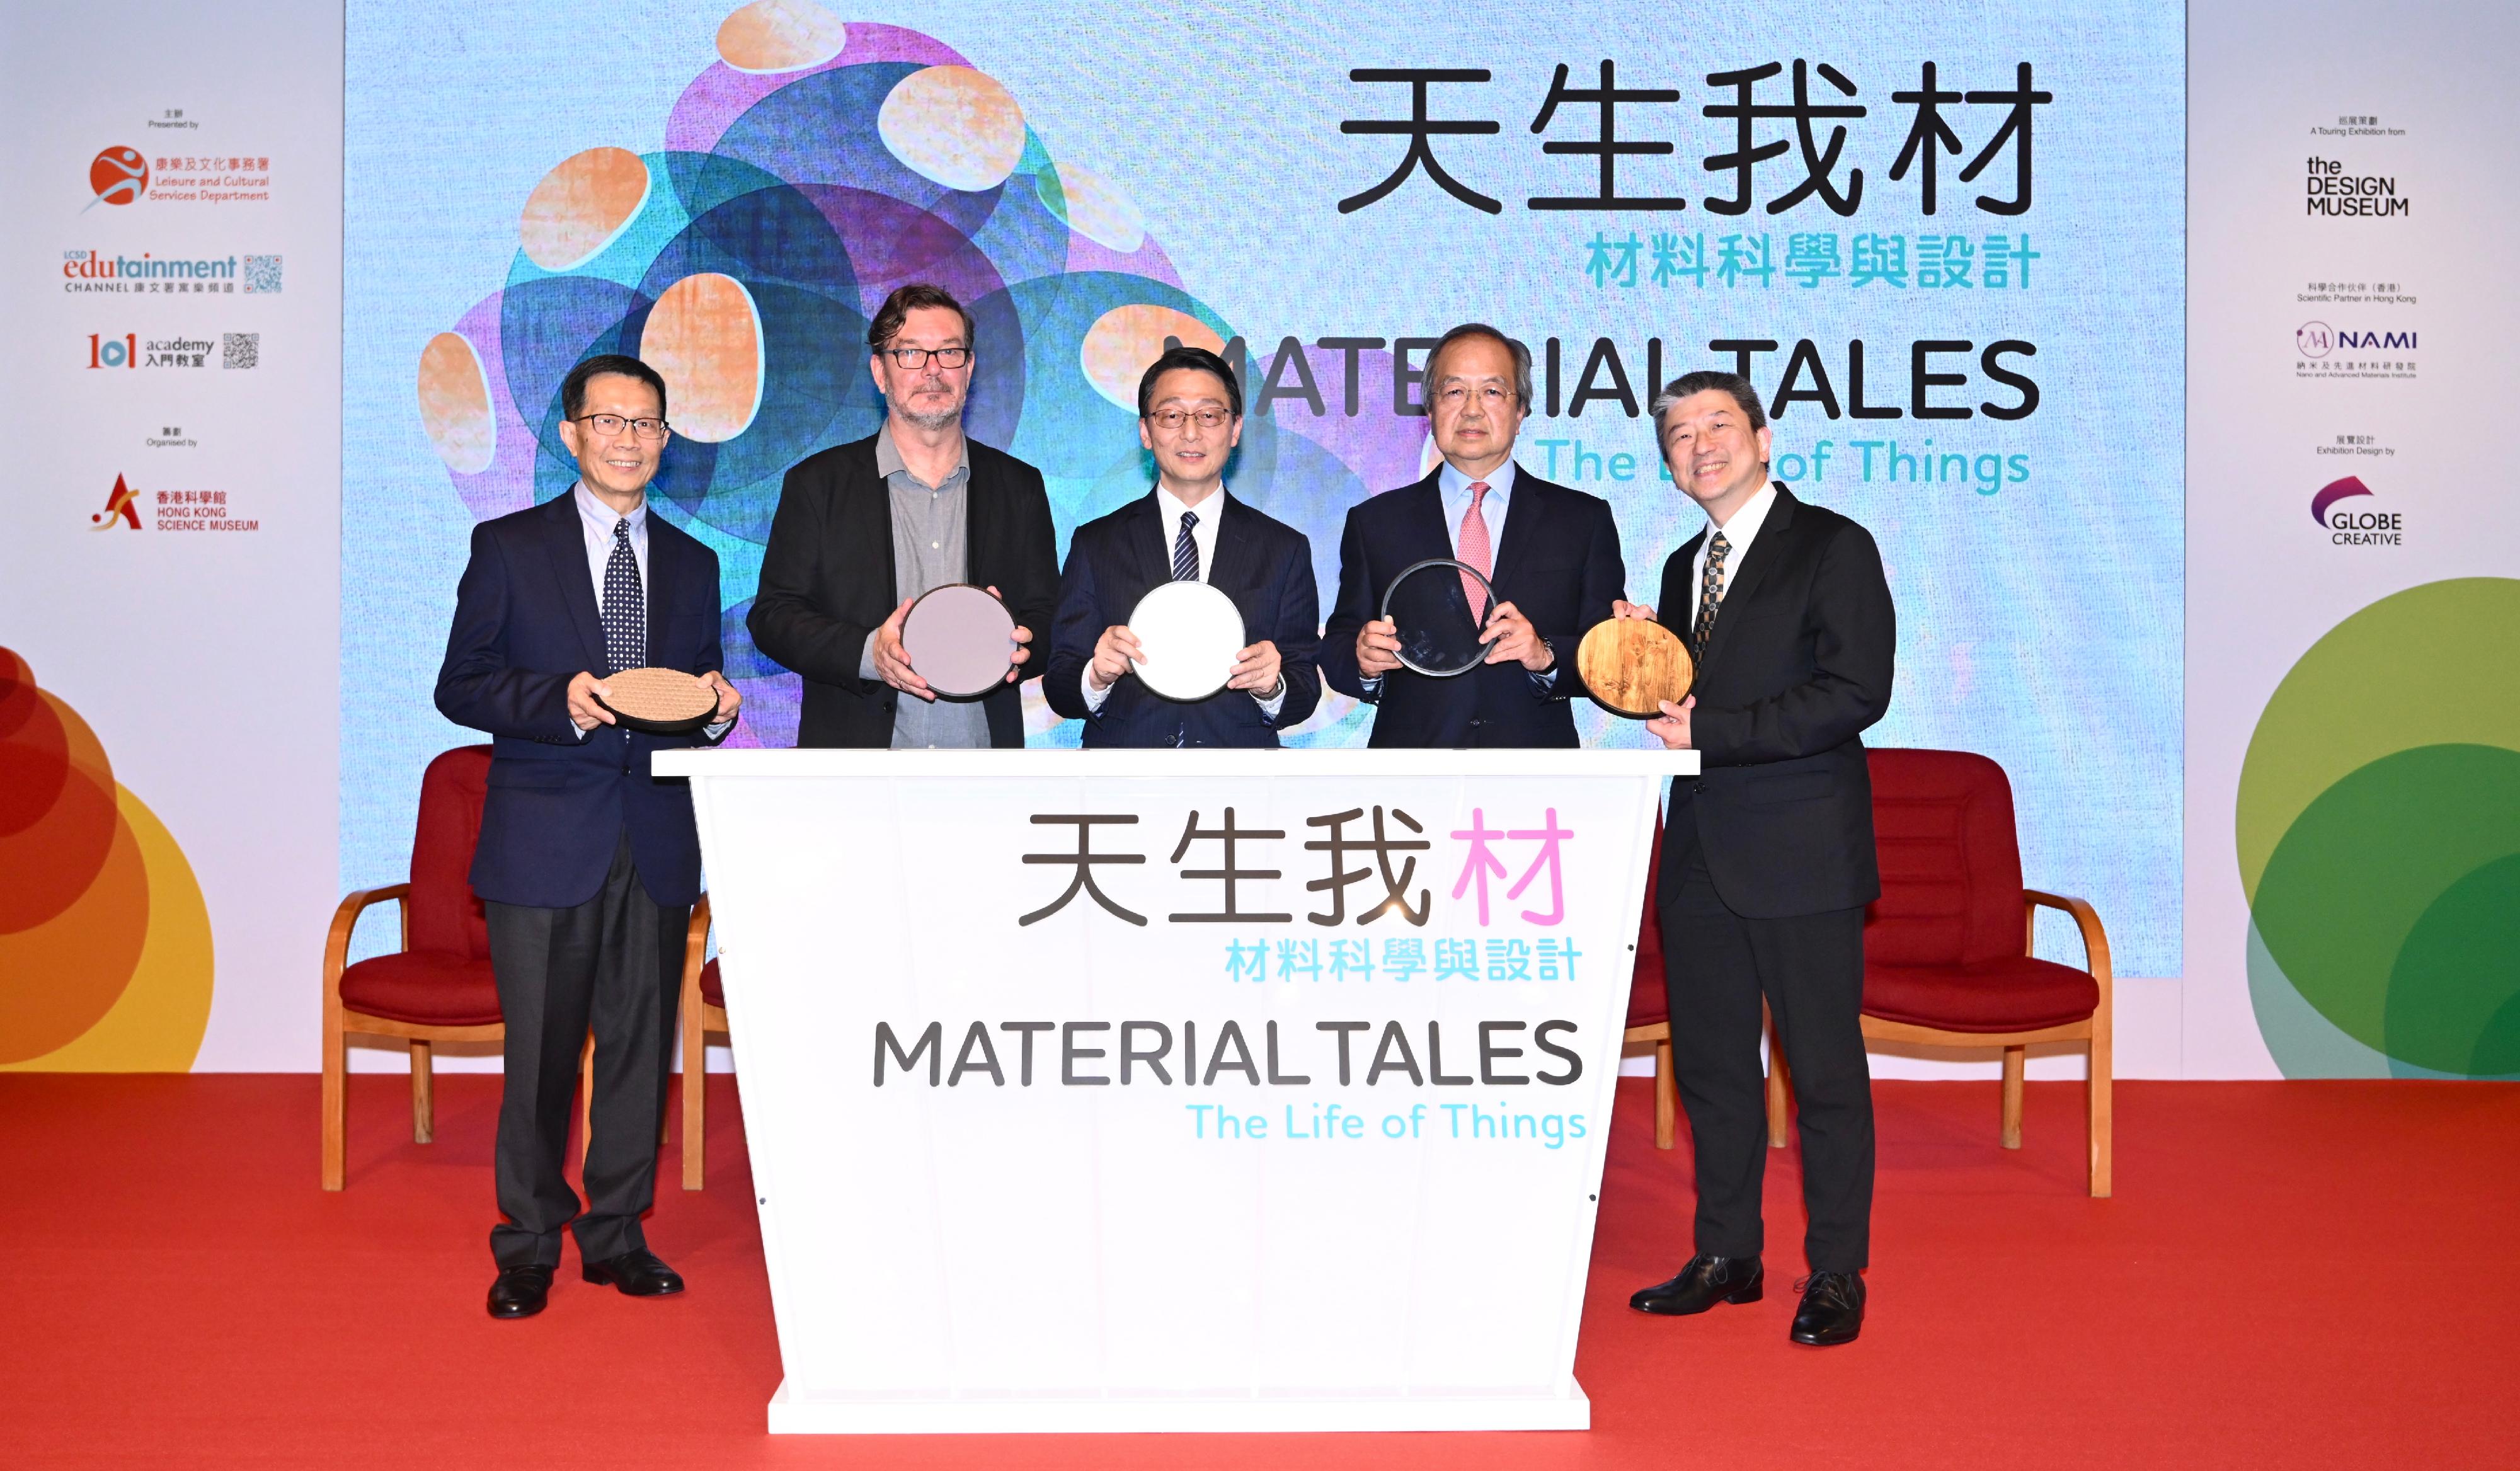 The opening ceremony for the exhibition "Material Tales - The Life of Things" was held today (May 18) at the Hong Kong Science Museum. Photo shows (from left) the Chairman of the Science Sub-committee, Museum Advisory Committee, Professor Ching Pak-chung; the Head of International Engagement of the Design Museum, London, Mr Chris Harris; the Director of Leisure and Cultural Services, Mr Vincent Liu; the Chief Executive Officer of the Nano and Advanced Materials Institute, Mr Daniel Yu; and the Museum Director of the Hong Kong Science Museum, Mr Lawrence Lee, officiating at the ceremony.